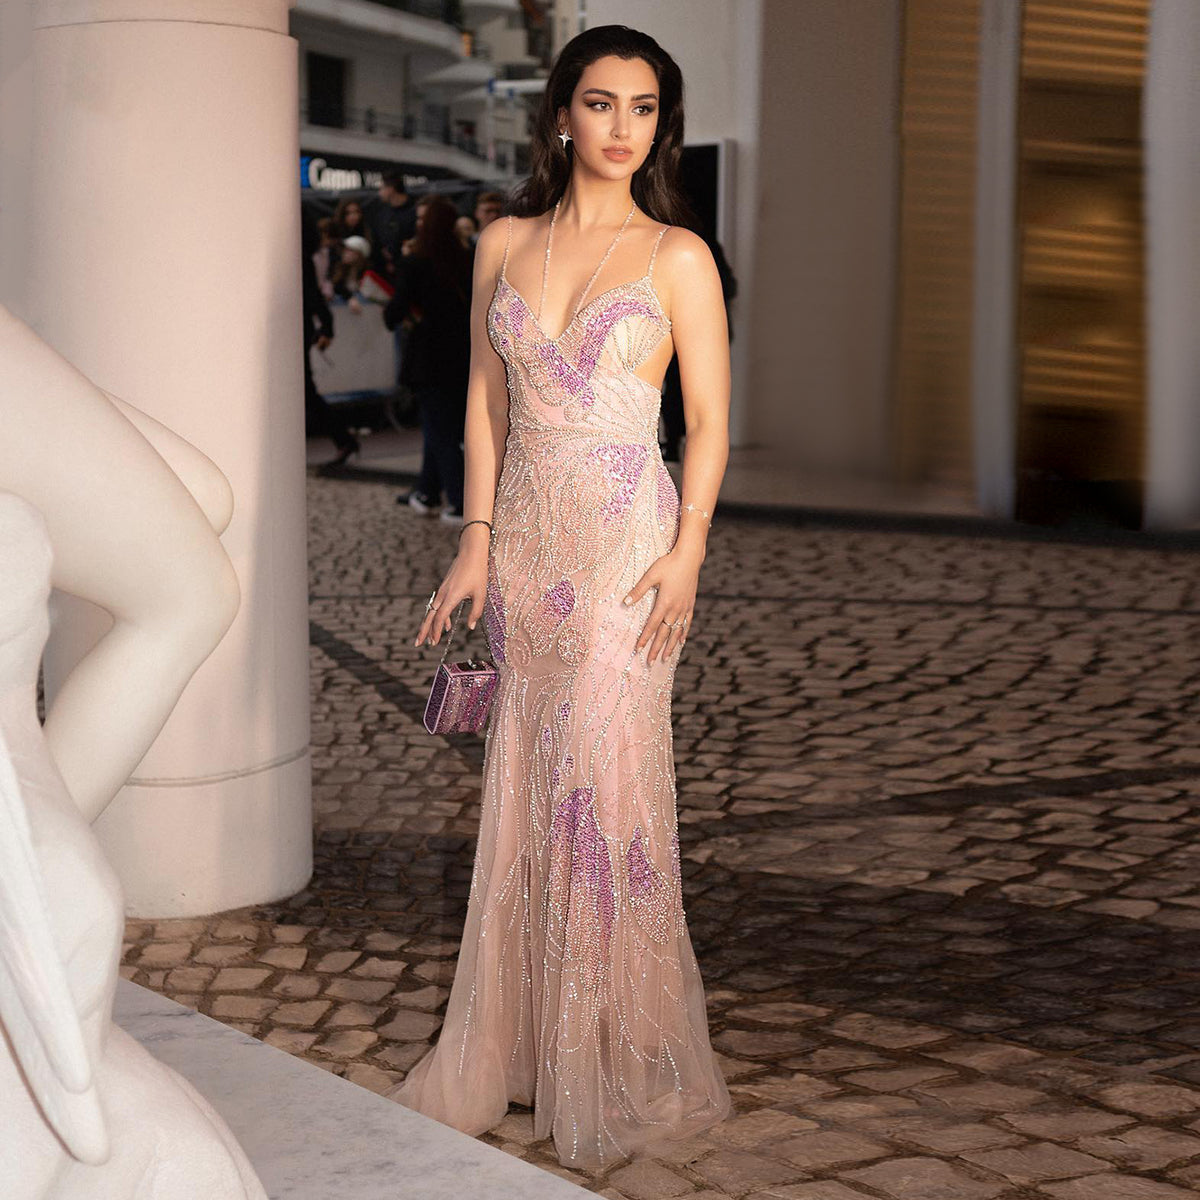 Sharon Said Luxury Mermaid Pink Evening Dresses with Feathers Scarf Spaghetti Straps Dubai Women Blue Wedding Prom Gowns SS478